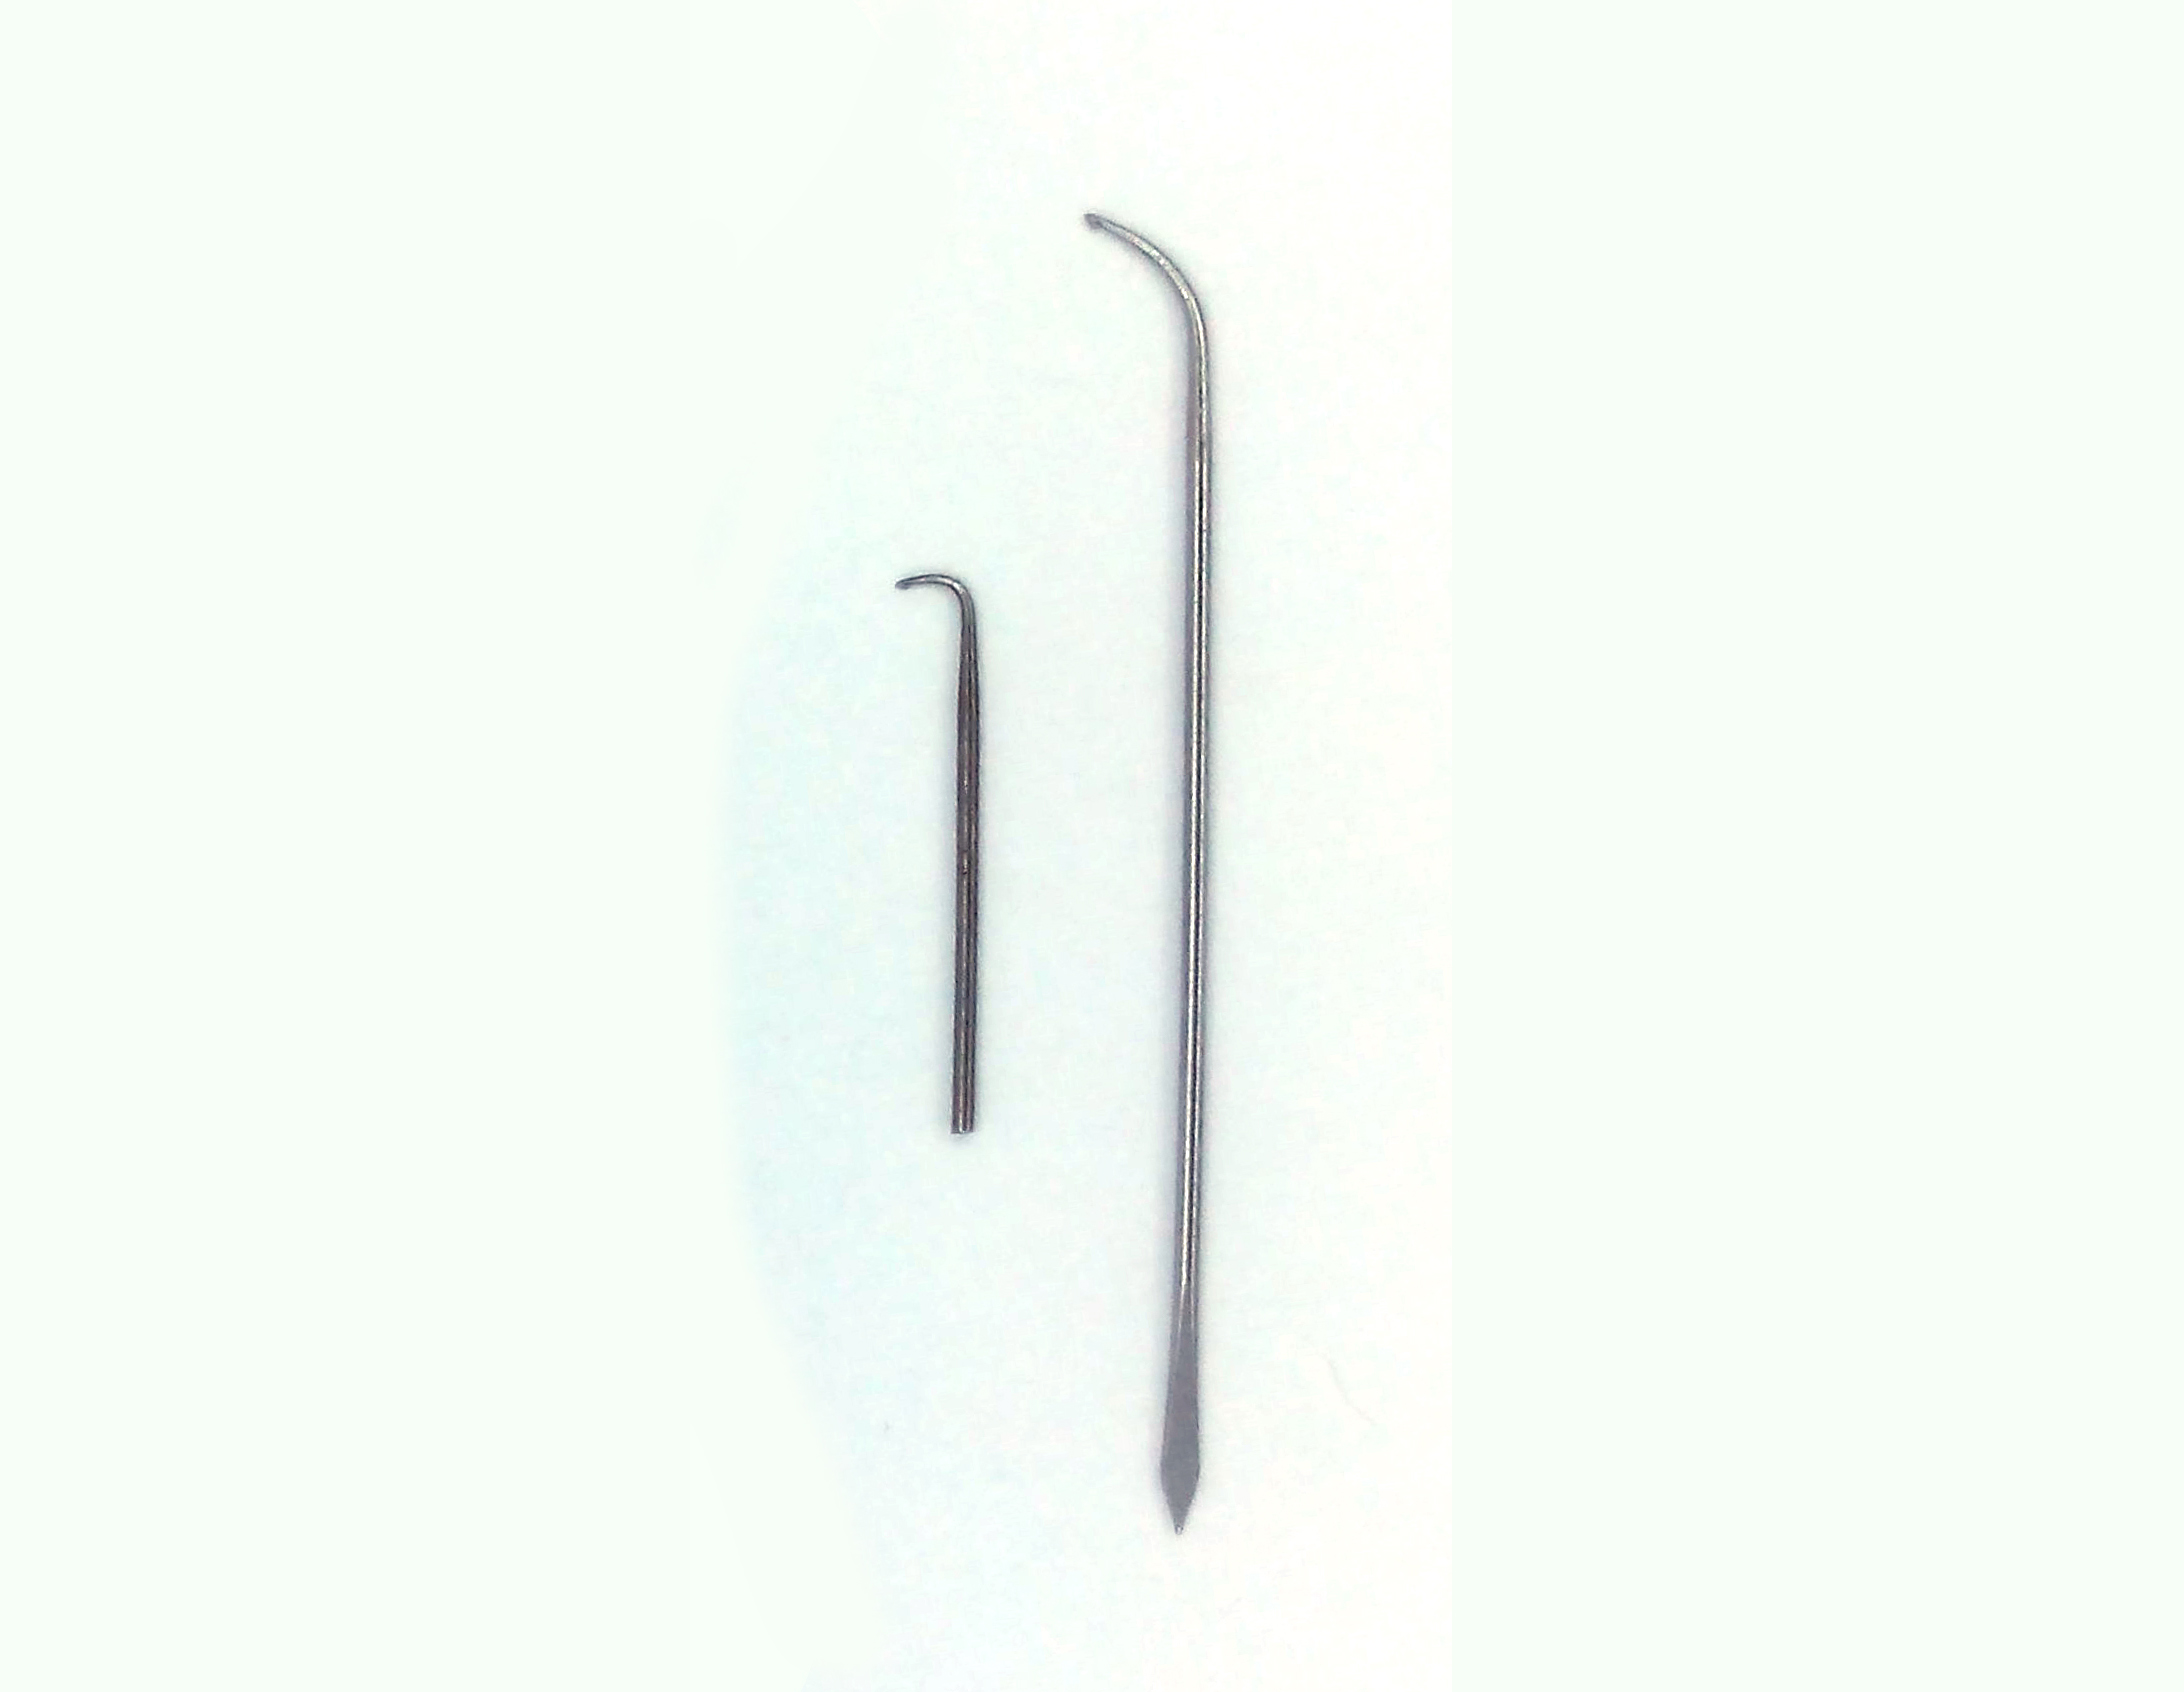 Superb ventilating needle For Hair Styling 